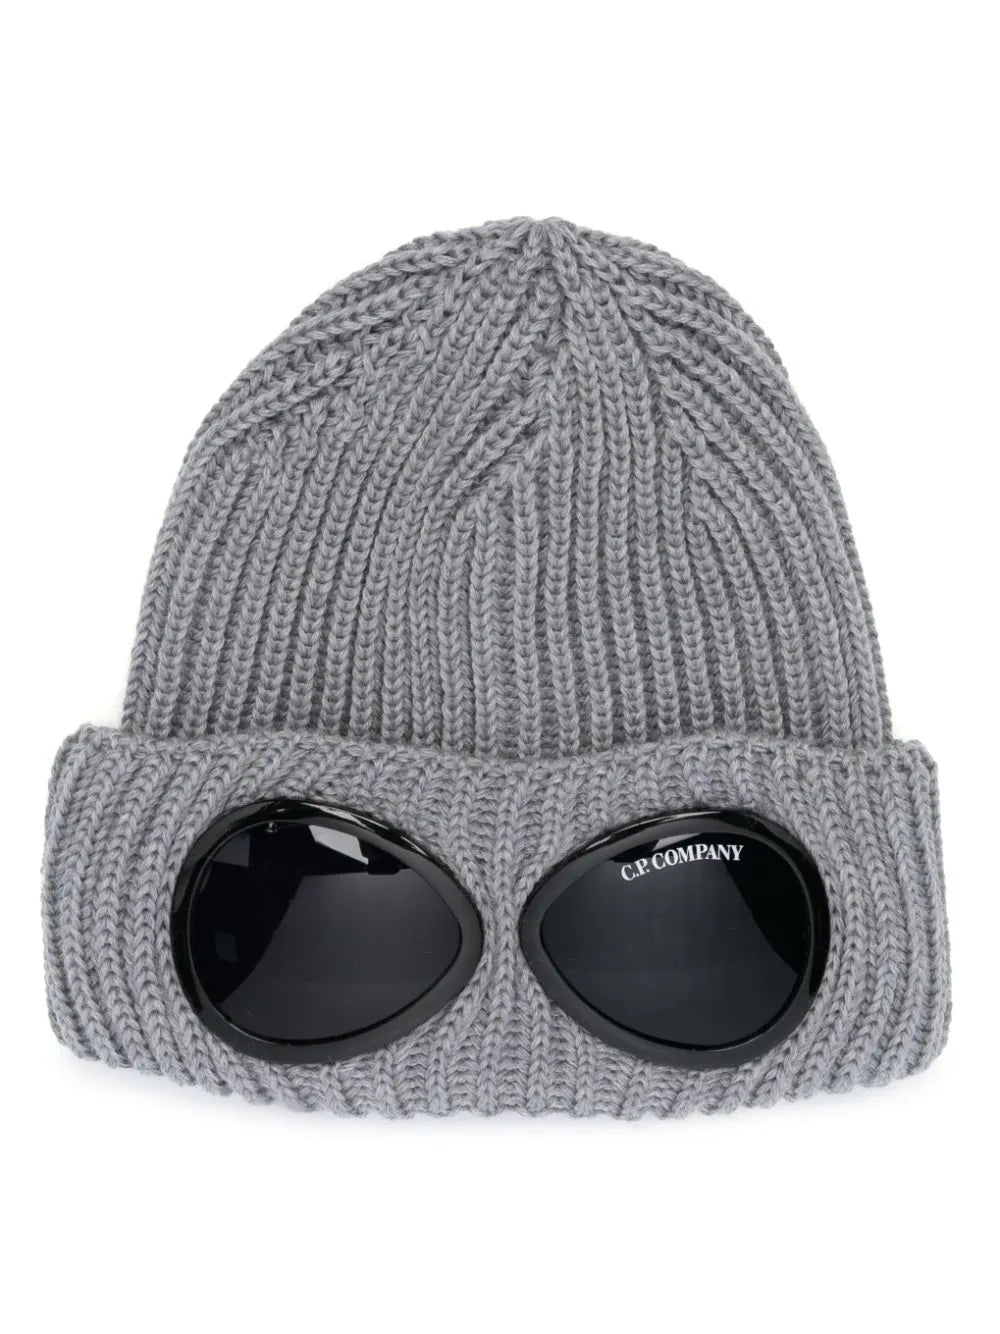 C.P Company Goggle Knit Hat in Grey